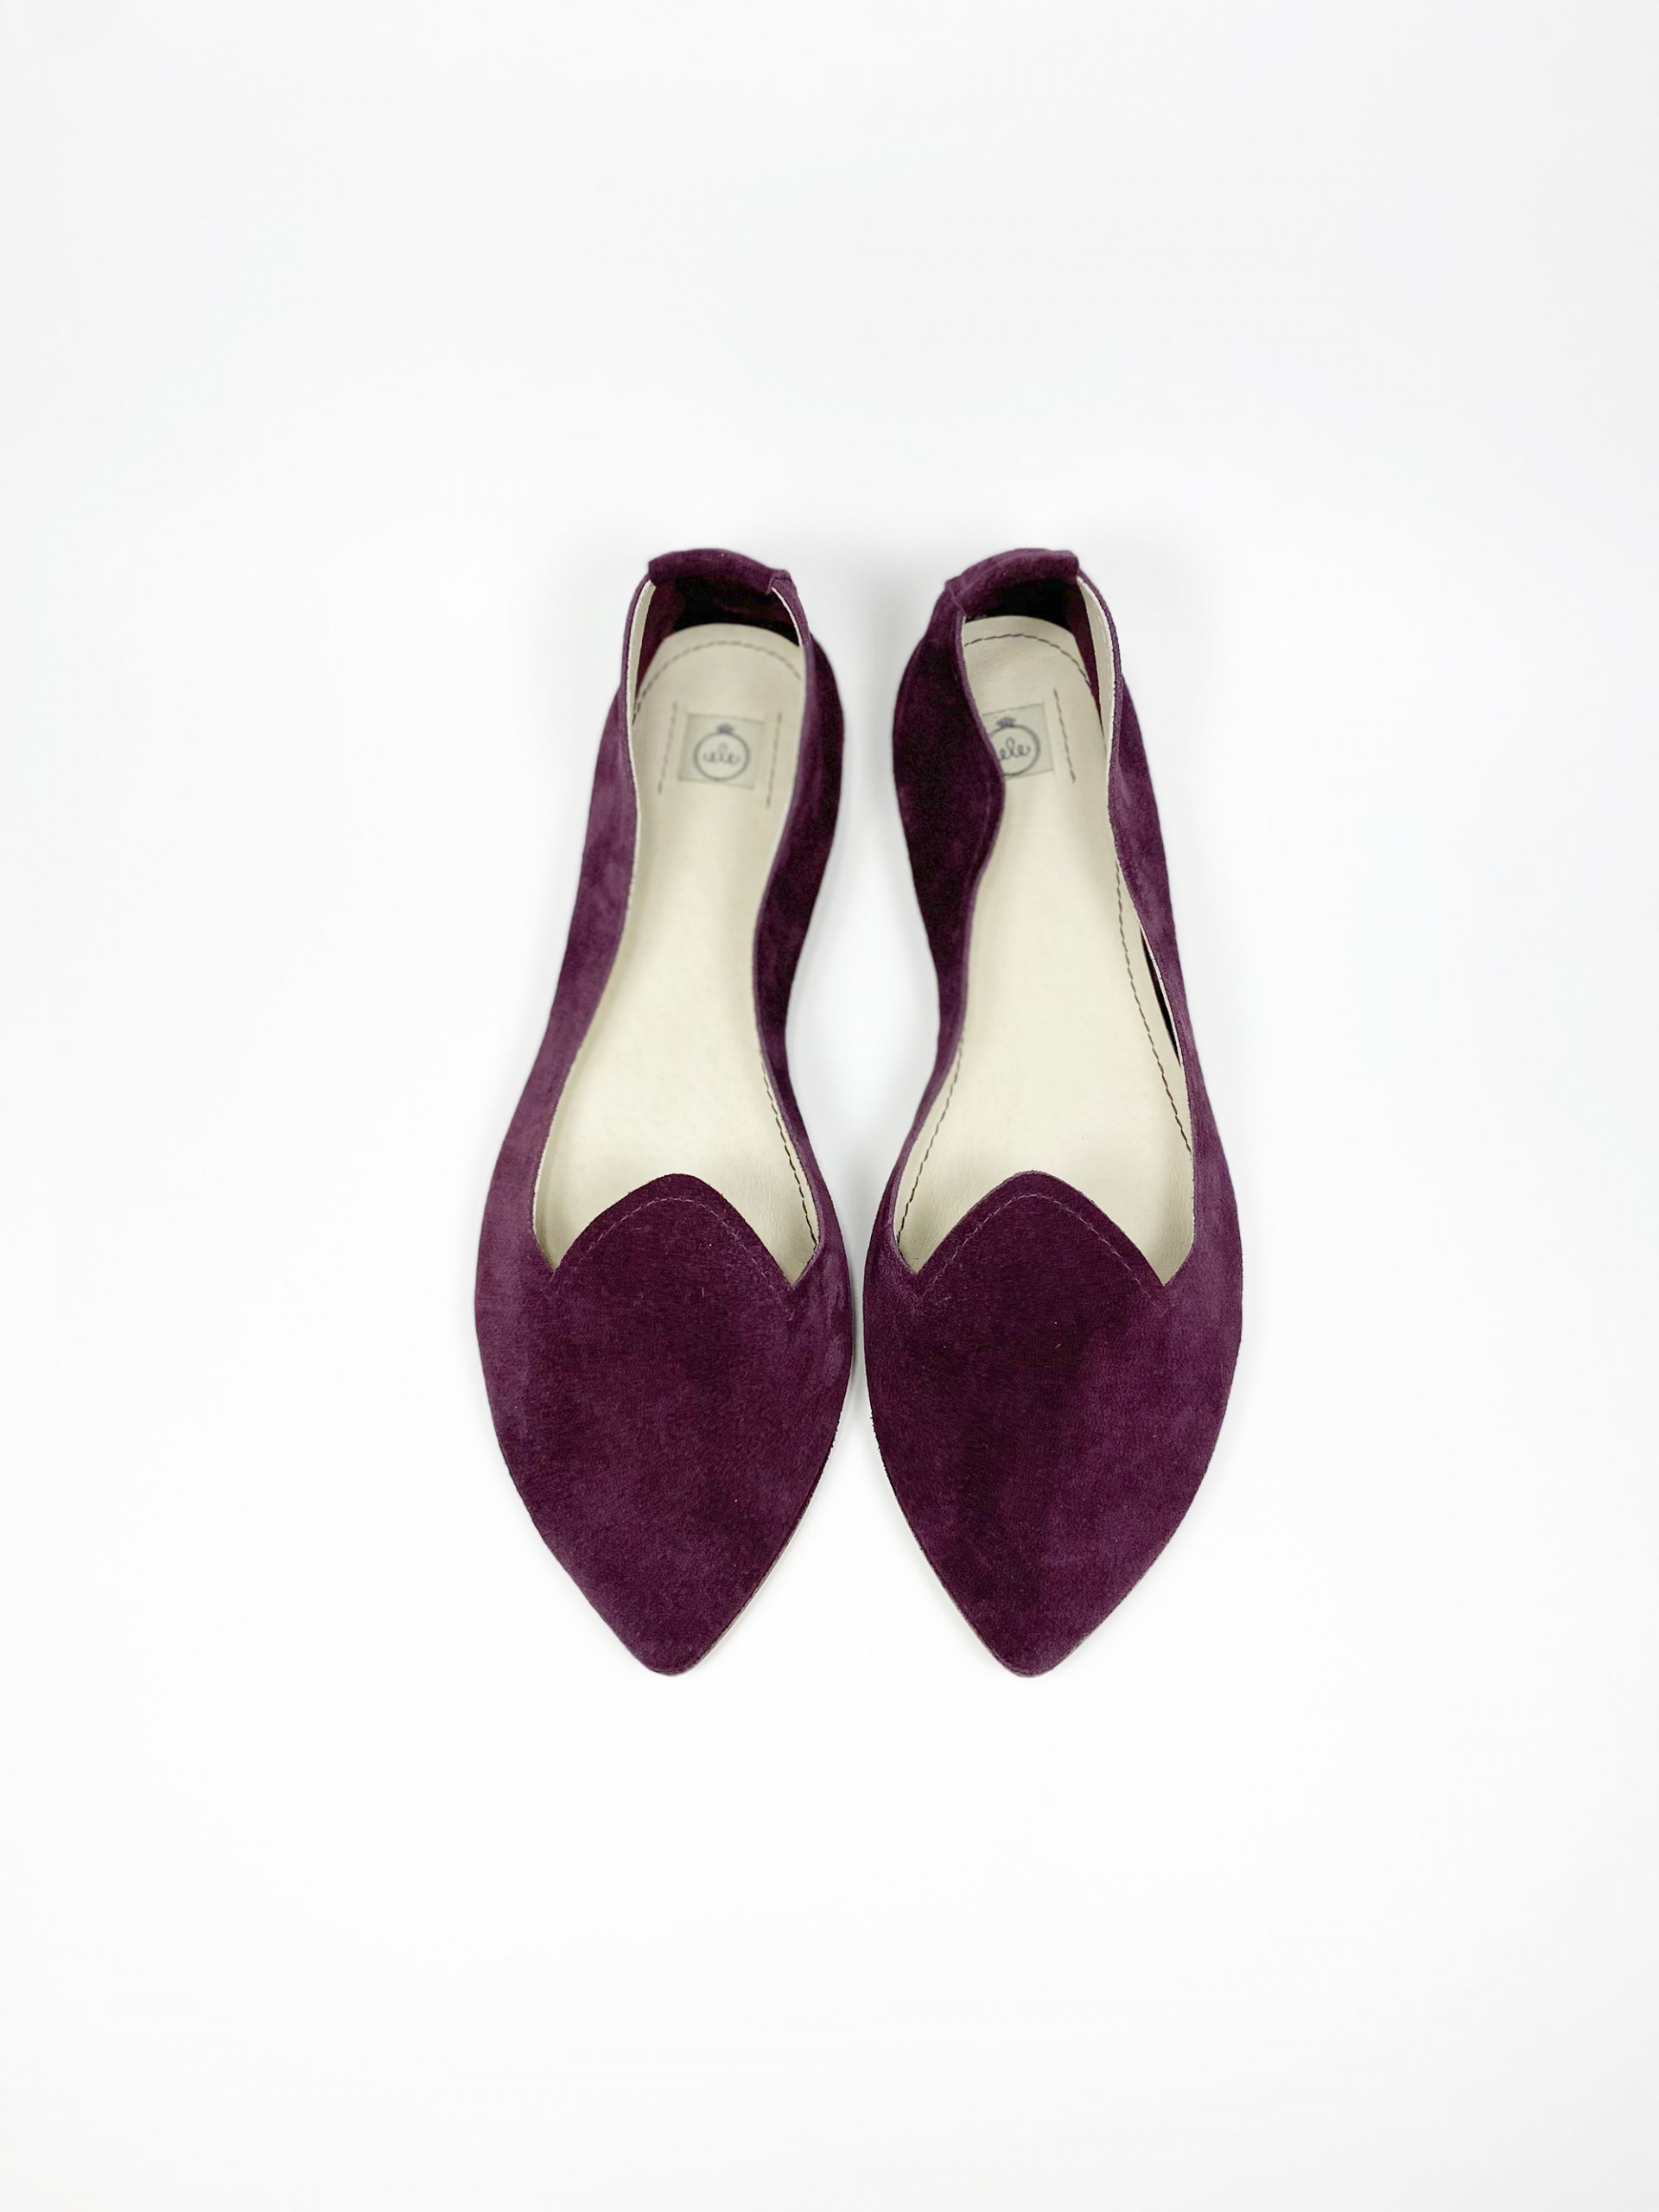 POINTY LOAFERS in BURGUNDY SOFT LEATHER — Ele Handmade Shoes